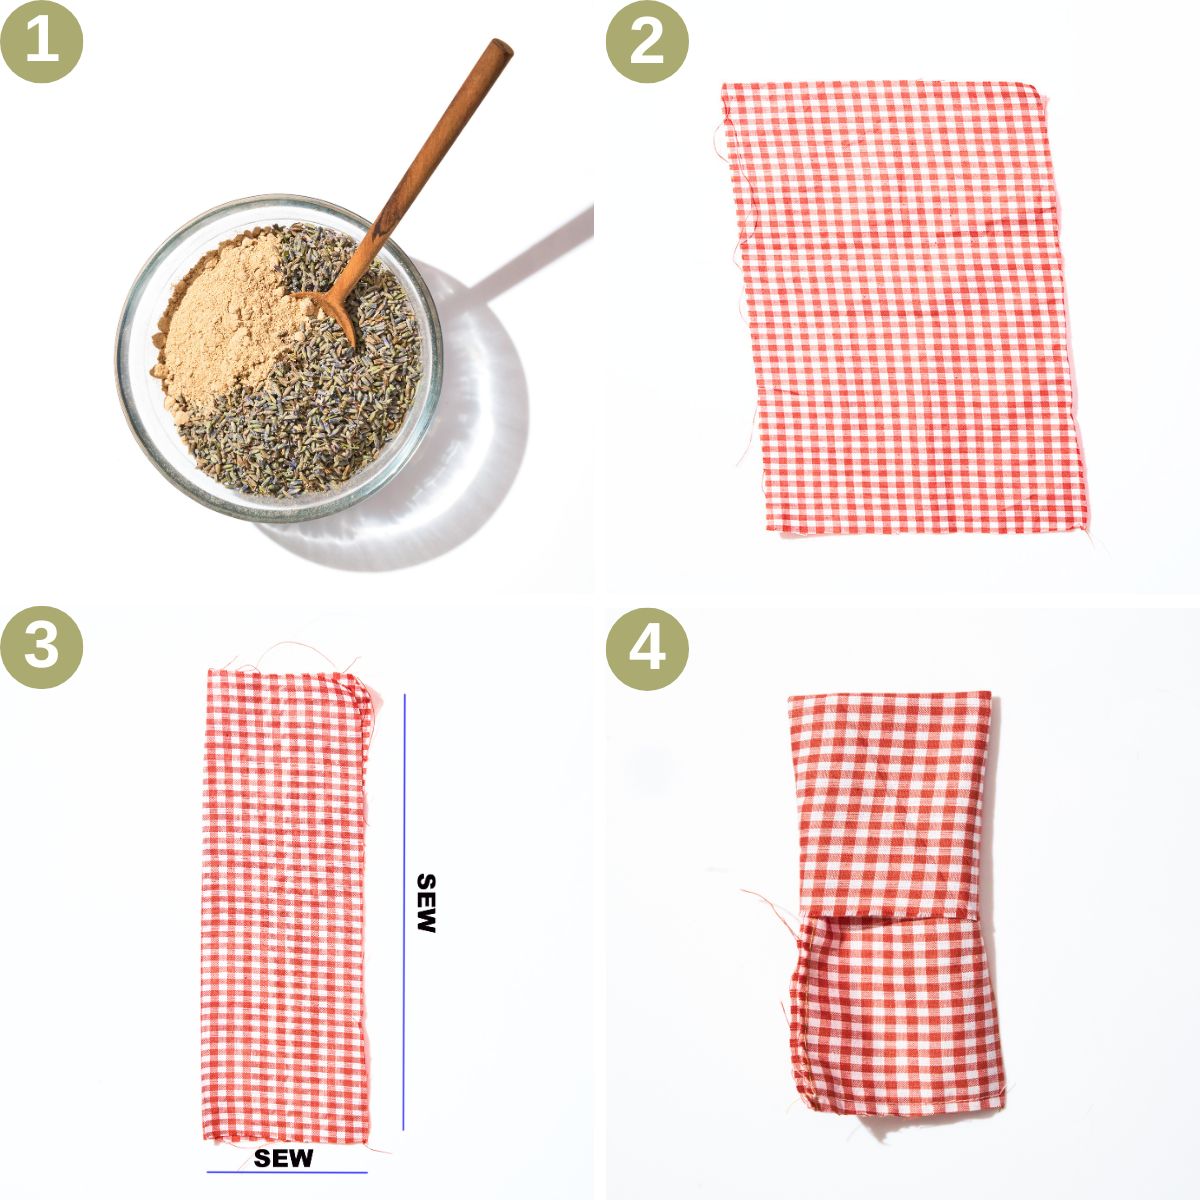 Lavender sachet steps 1 to 4, mixing filling and sewing rectangle.